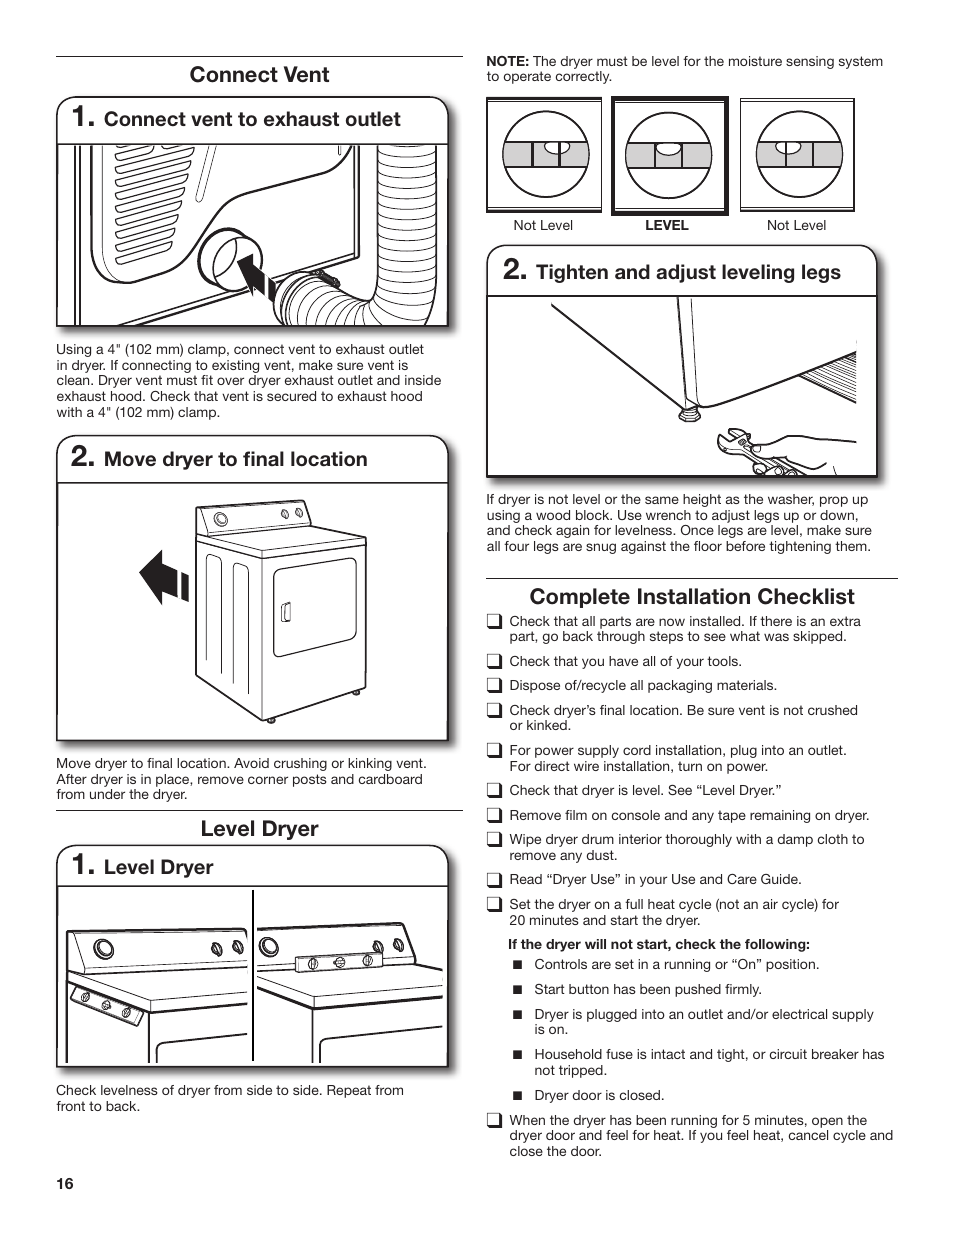 Connect vent, Level dryer, Complete installation checklist q | Connect vent to exhaust outlet, Tighten and adjust leveling legs, Move dryer to final location | Maytag WED4890BQ Installation User Manual | Page 16 / 20